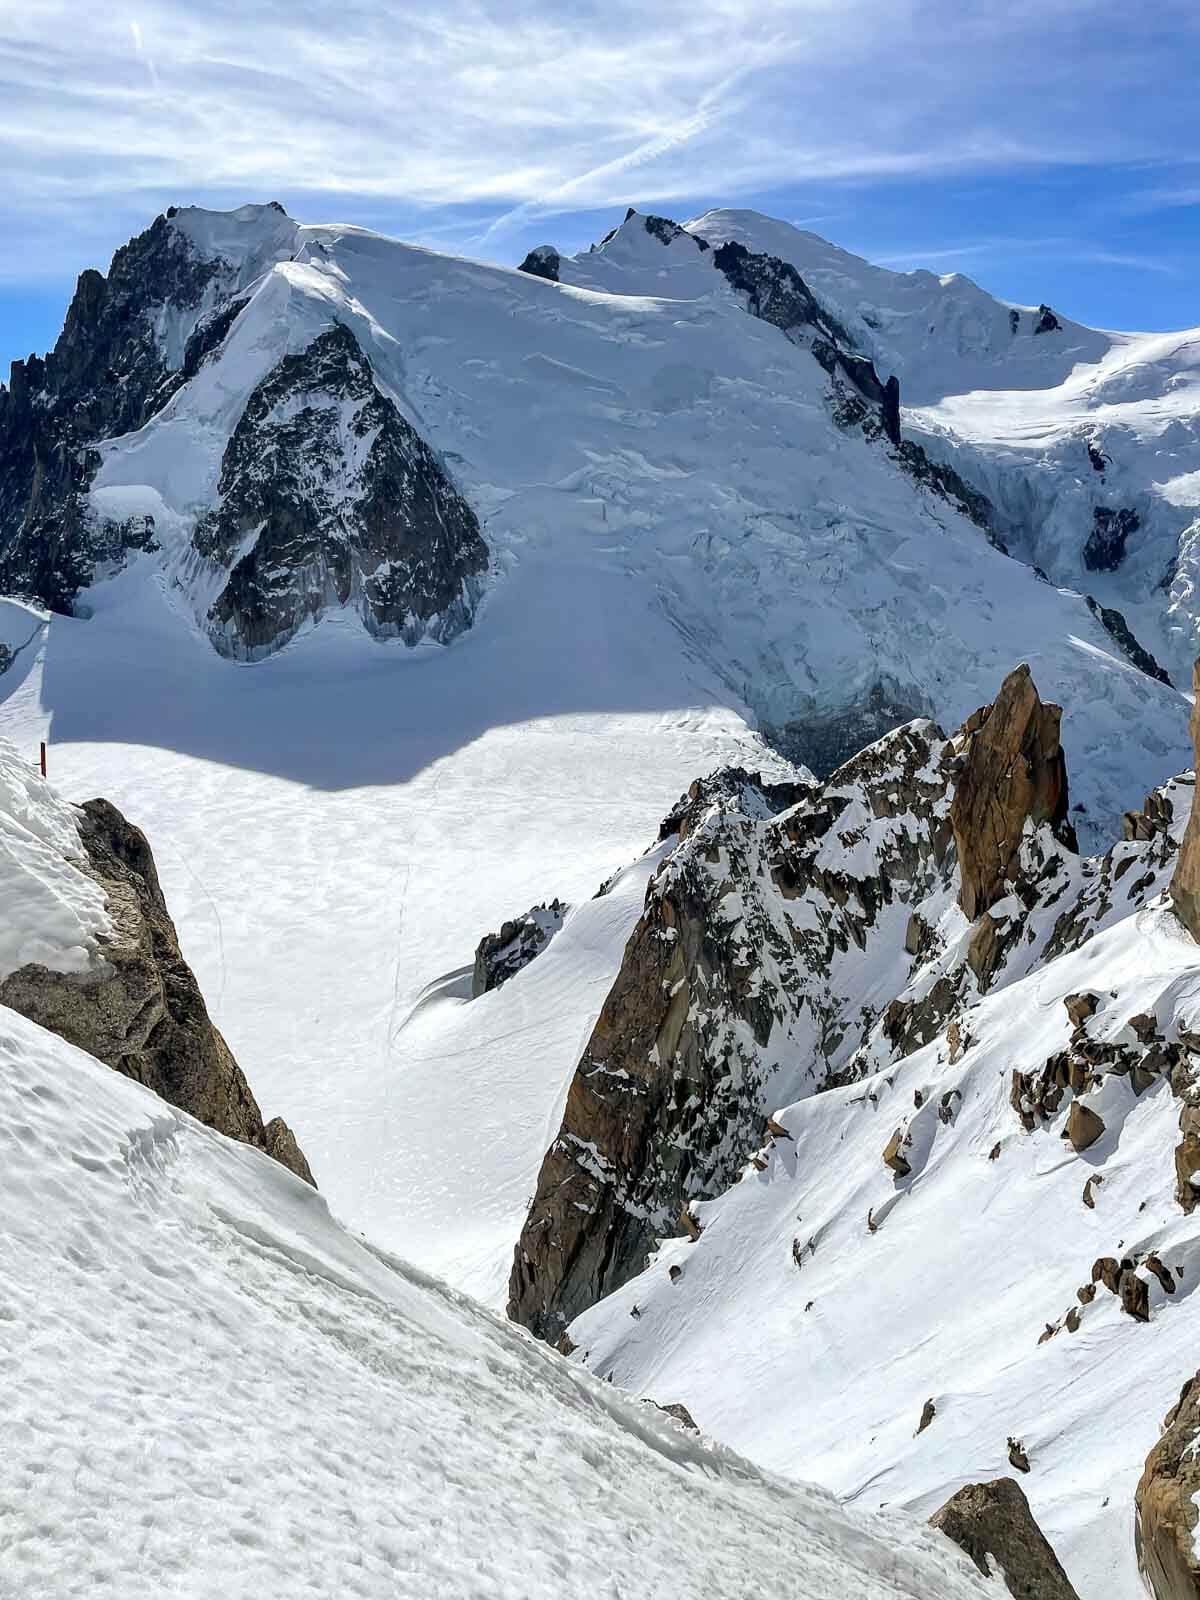 view from Aiguille du Midi in Chamonix.